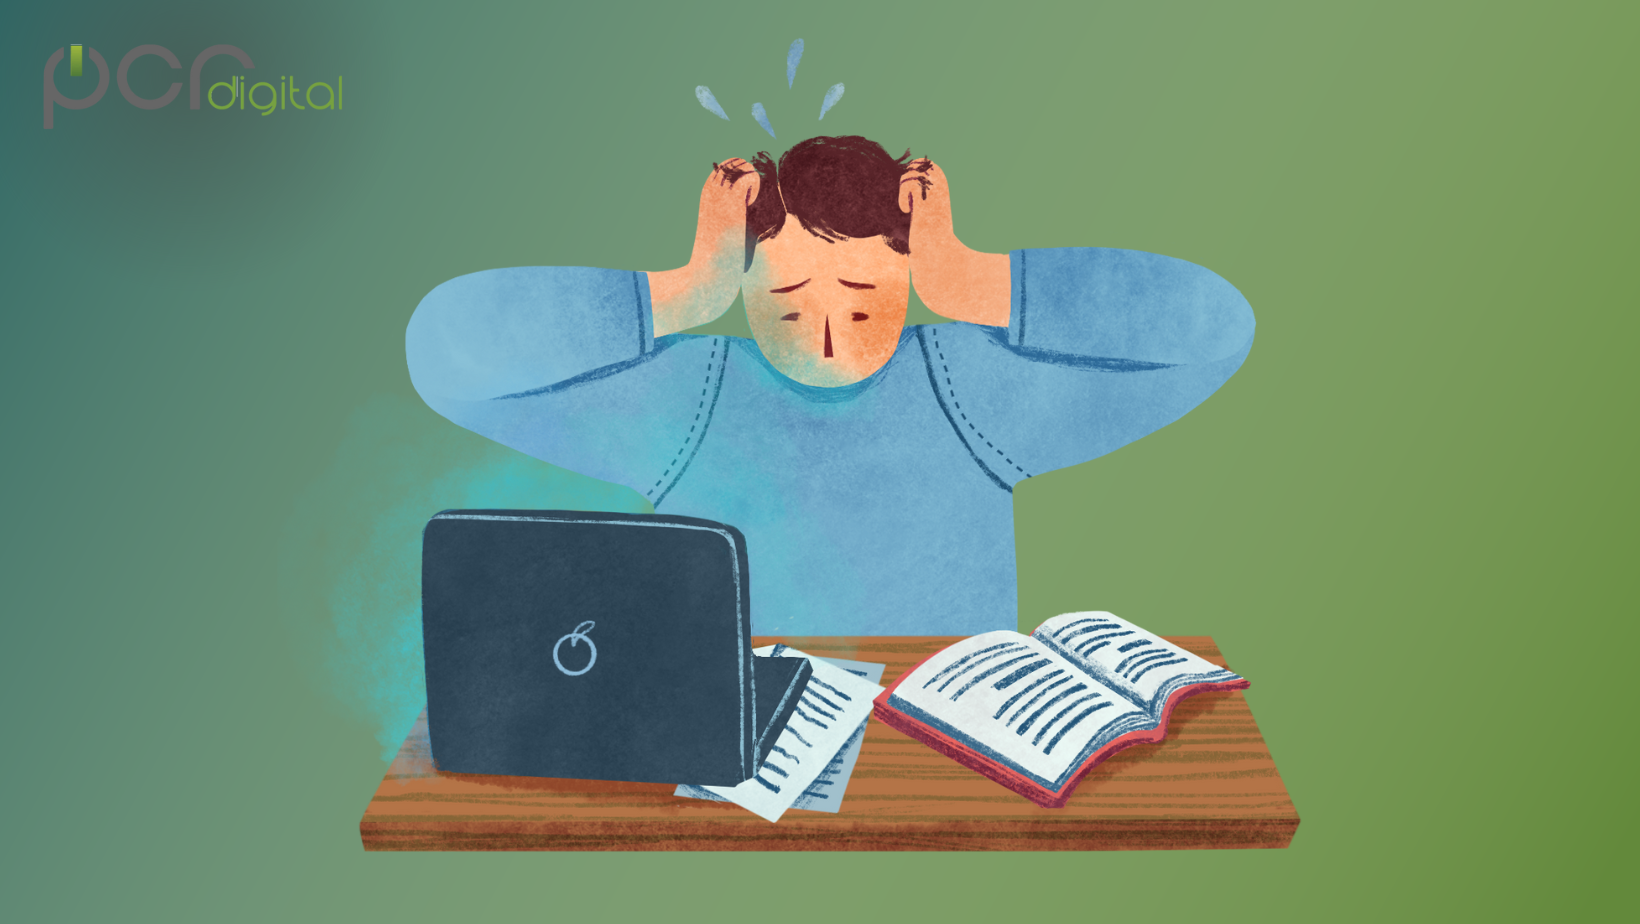 Decorative cartoon of a stressed IT worker